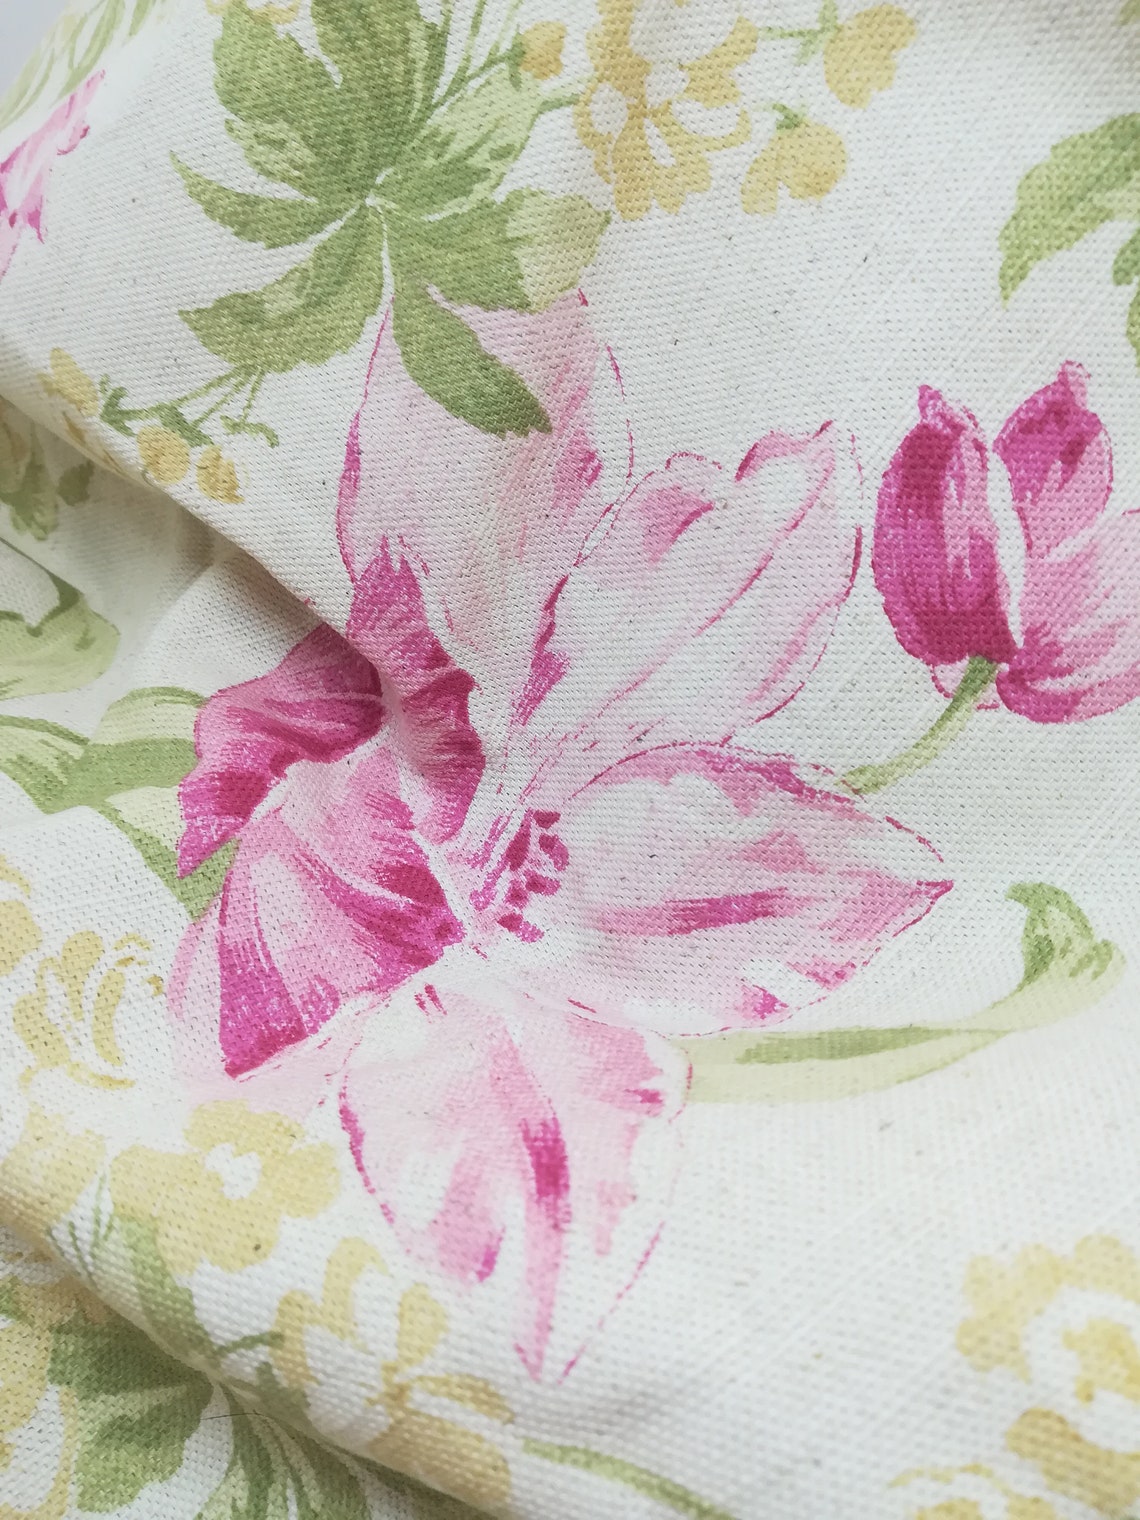 Vintage Laura Ashley Sherborne Floral Fabric with red tulips | Etsy